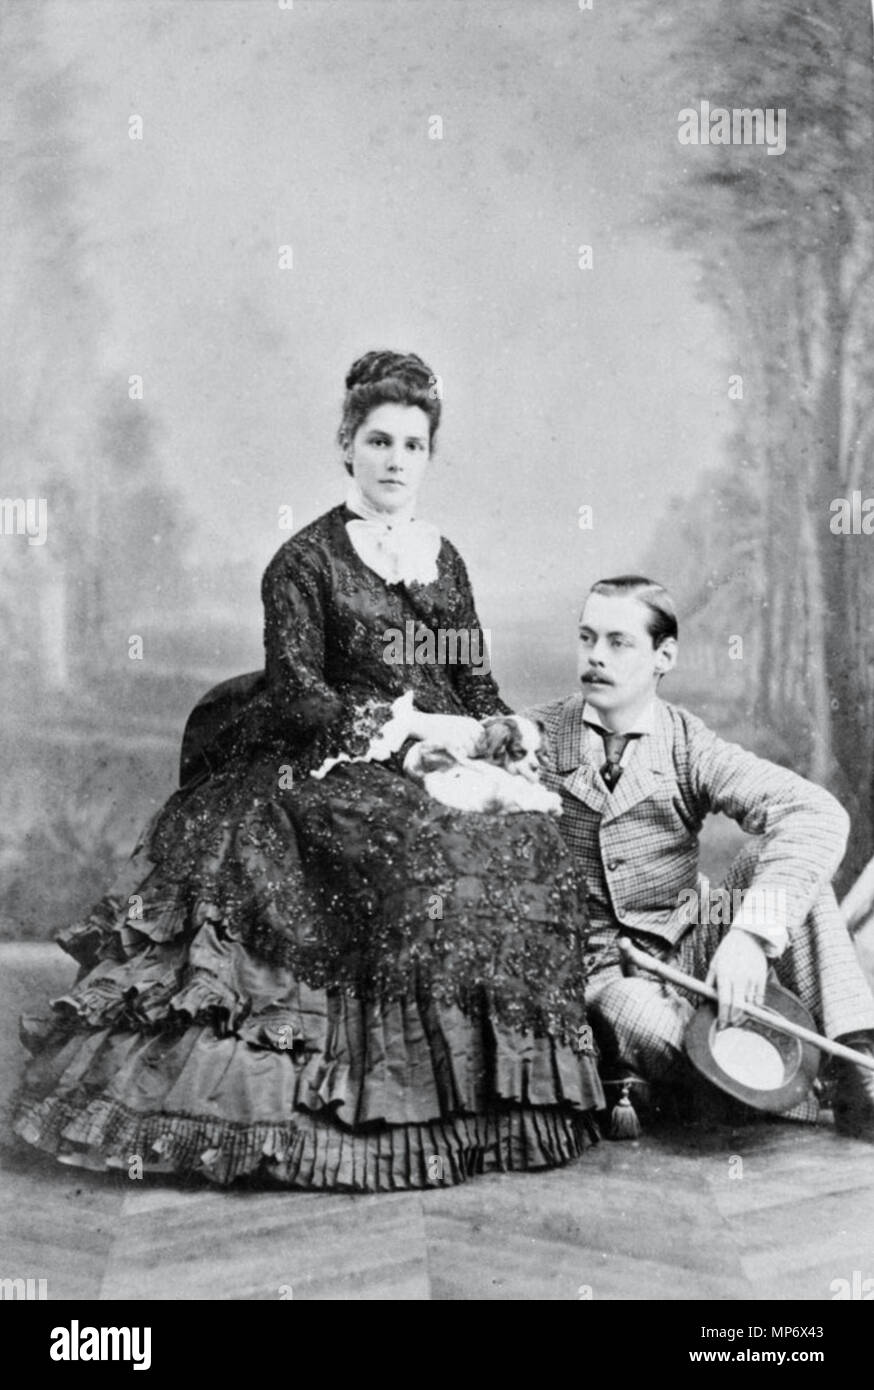 English: Portrait of Lord Randolph Churchill and Lady Jennie Jerome. Français : Portrait de Lord Randolph Churchill et Lady Jennie Jerome. English: Lord Randolph Churchill (1849-1895) married on April 15, 1874 at the British Embassy in Paris with Miss Jennie Jerome (1854-1921). Photographer Georges Penabert also made two photographs for the same period, of Lady Hélène Standish, present at the wedding ceremony with her husband Henry Noailles Widdringtion Standish, Lord of the Manor of Standish. The Standish couple frequent Lord Randolph Churchill and they are quoted in Jennie Jerome's correspon Stock Photo